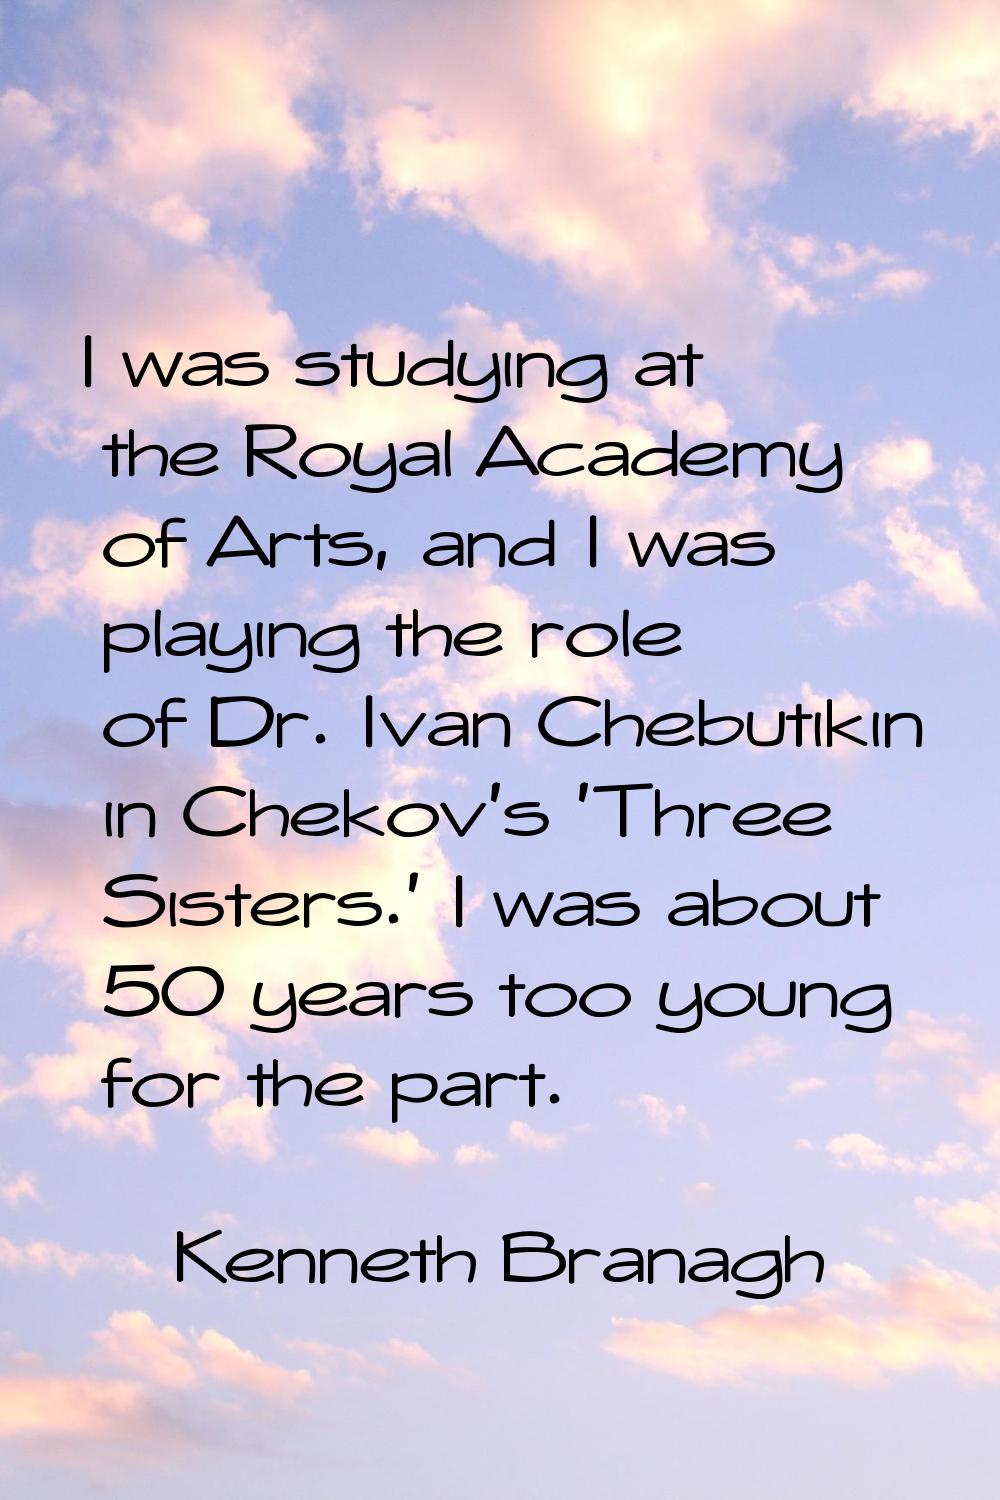 I was studying at the Royal Academy of Arts, and I was playing the role of Dr. Ivan Chebutikin in C